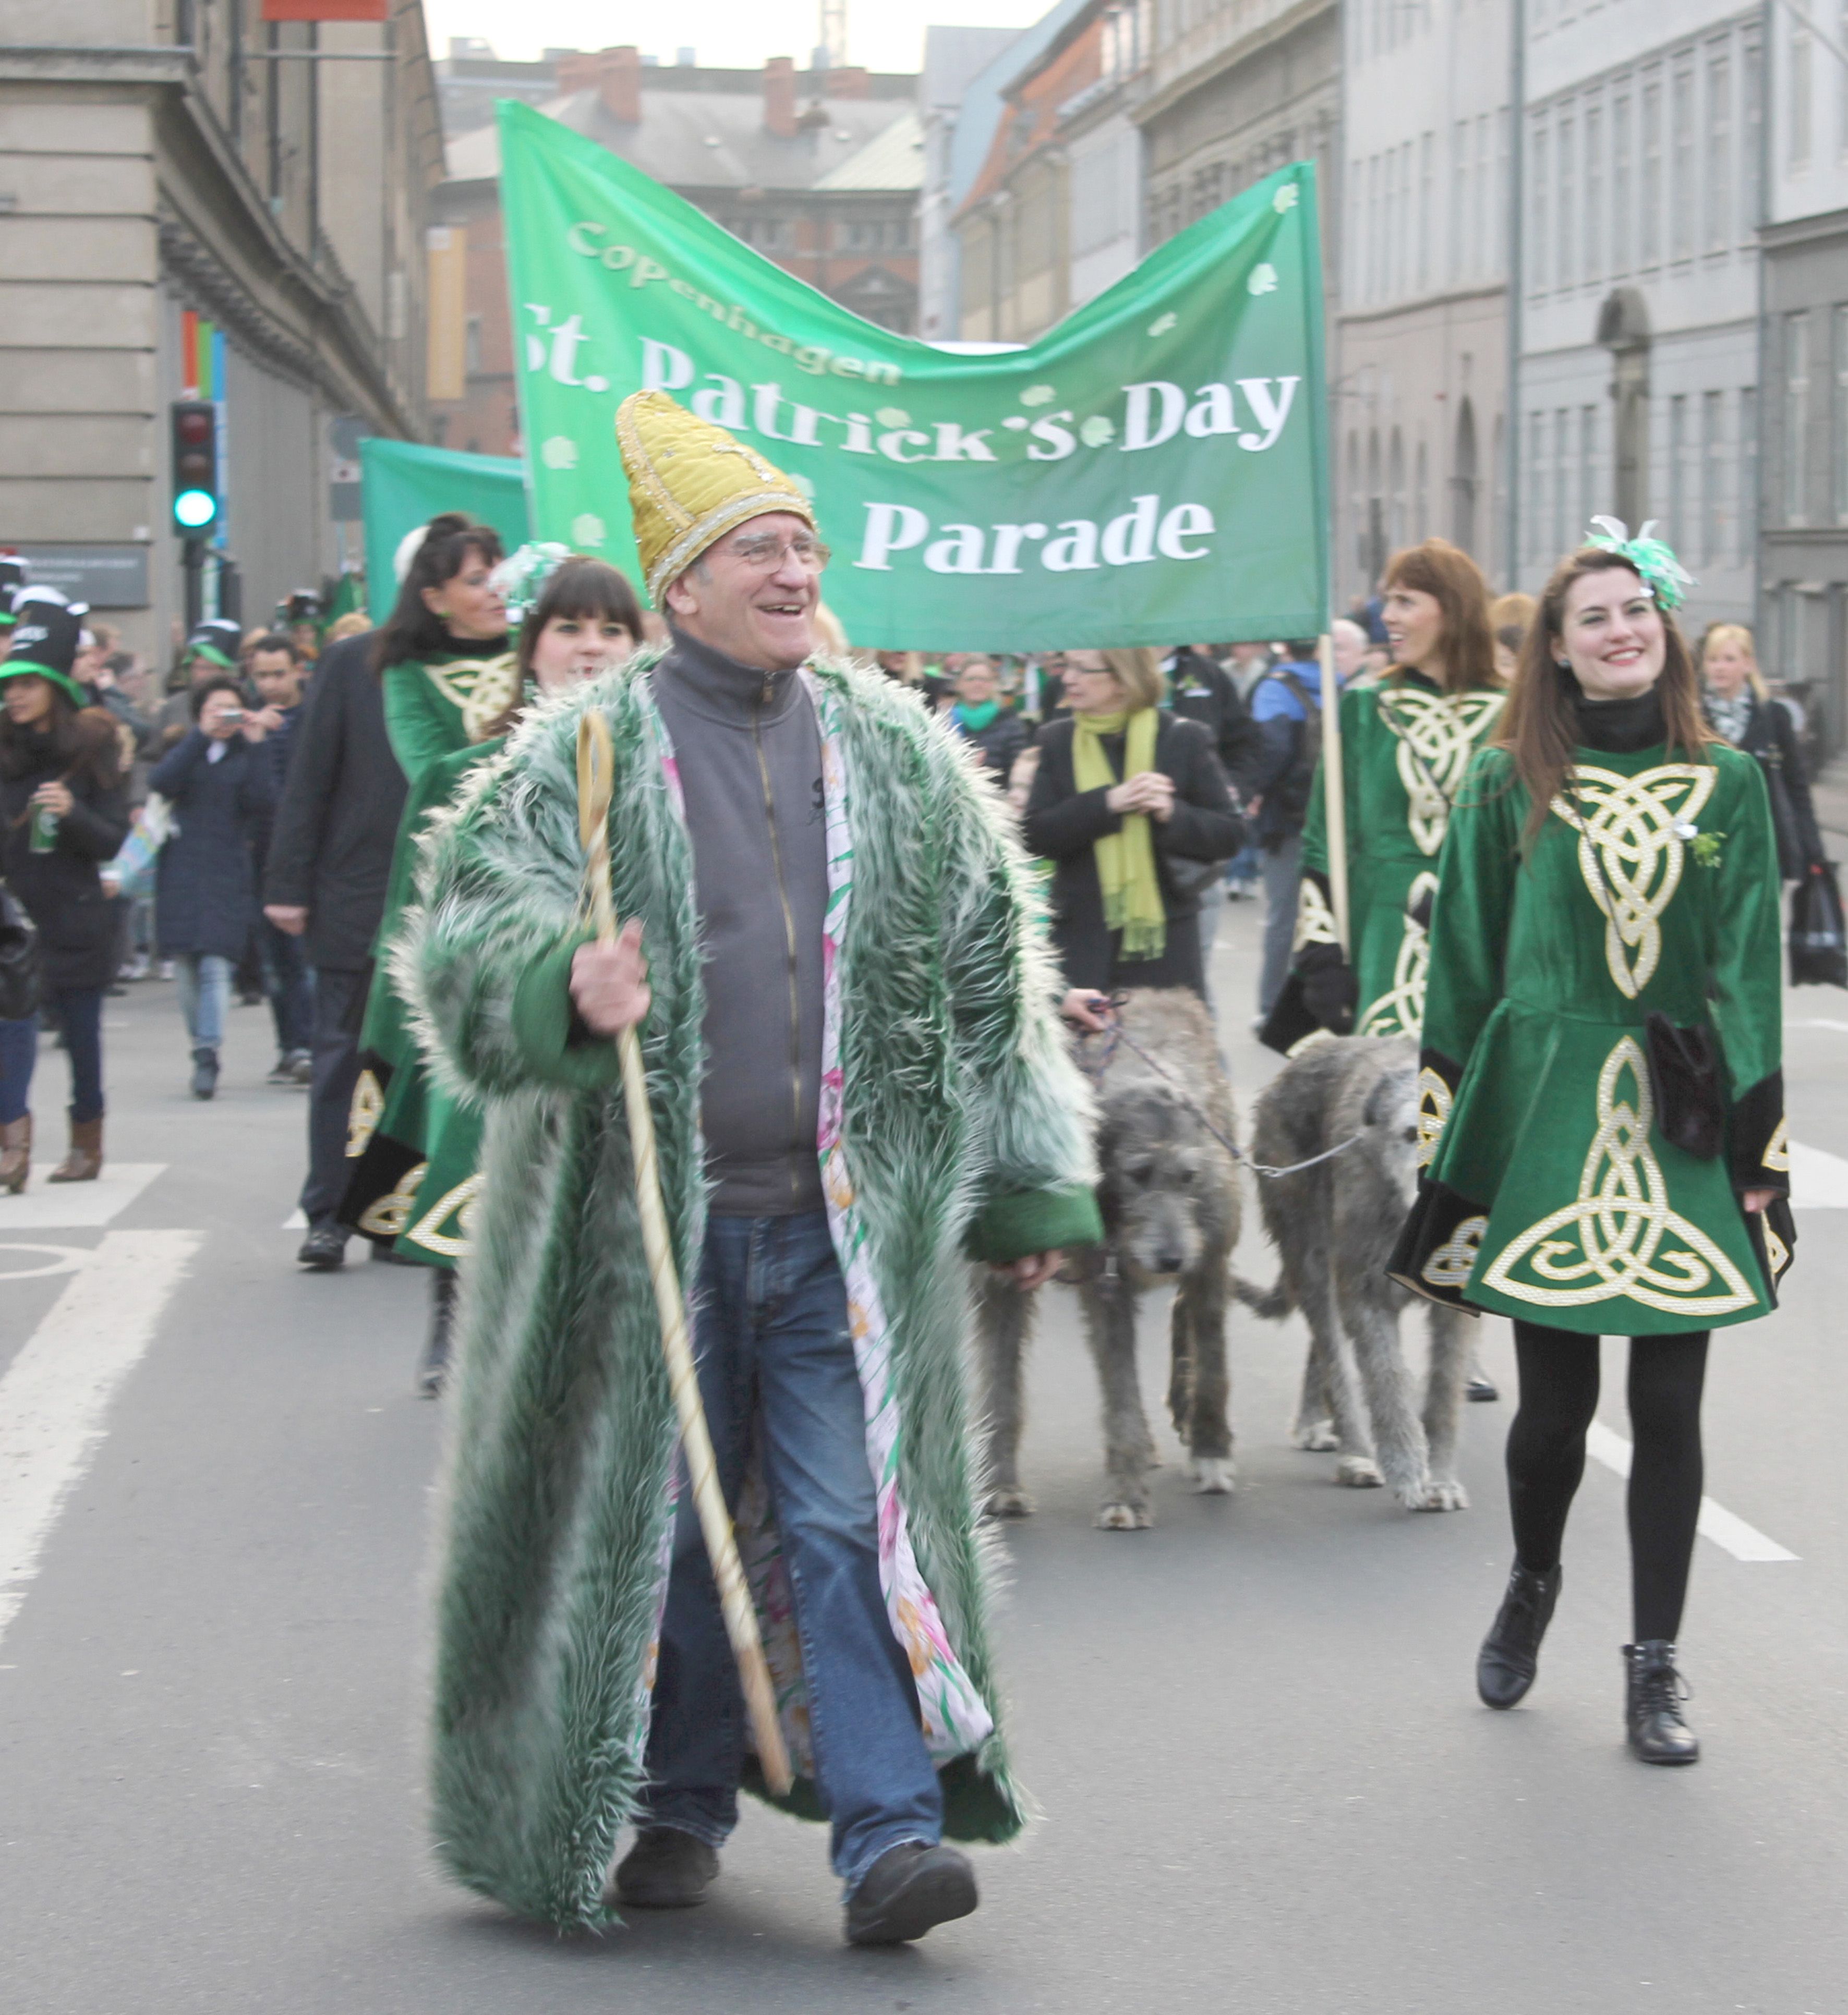 Good vibes on the laid-back and participatory St Patrick’s Day Parade